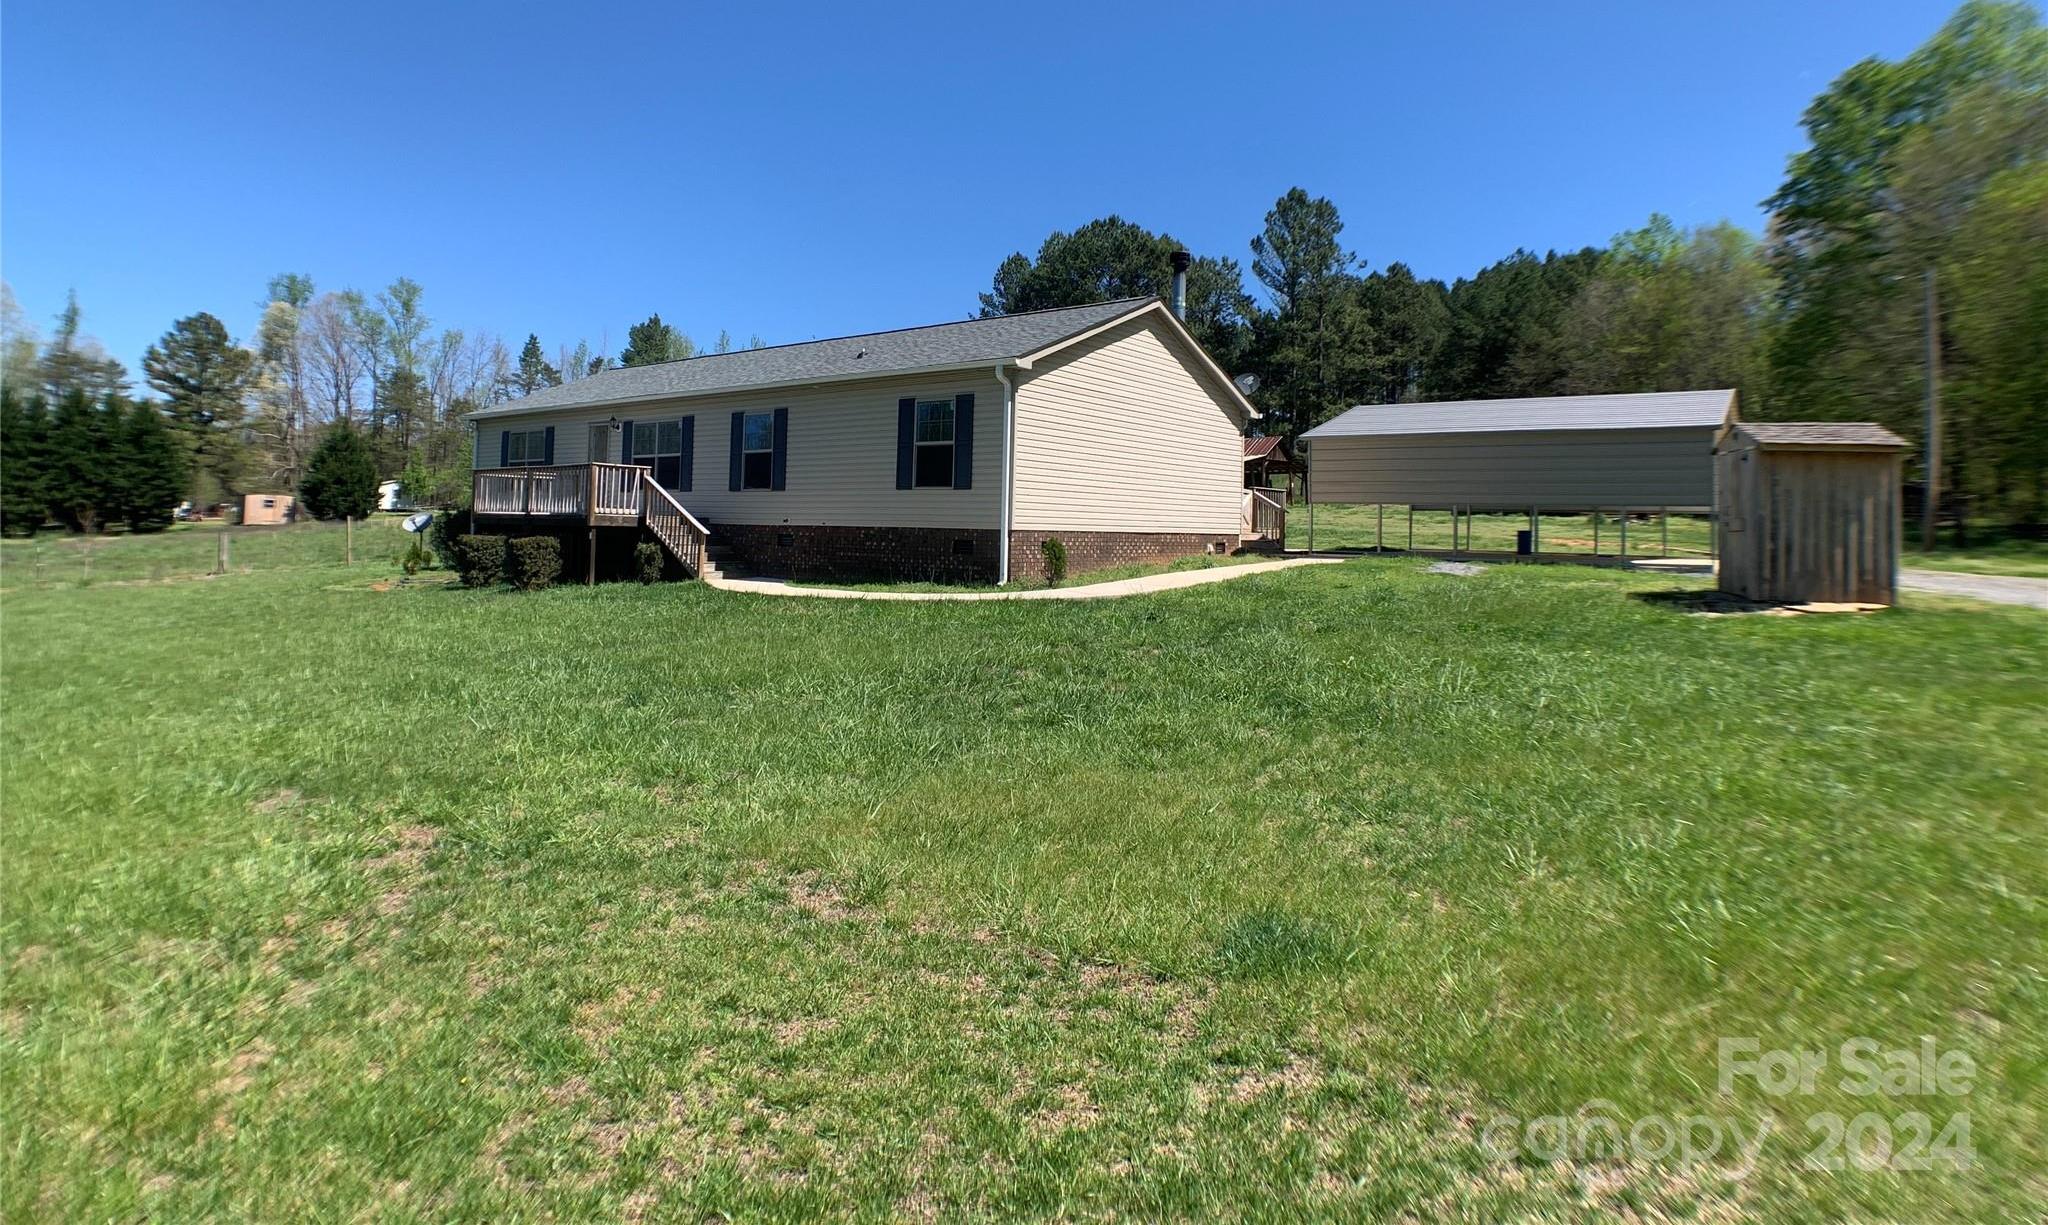 Photo one of 5200 Helms End Of Trl Lincolnton NC 28092 | MLS 4129329